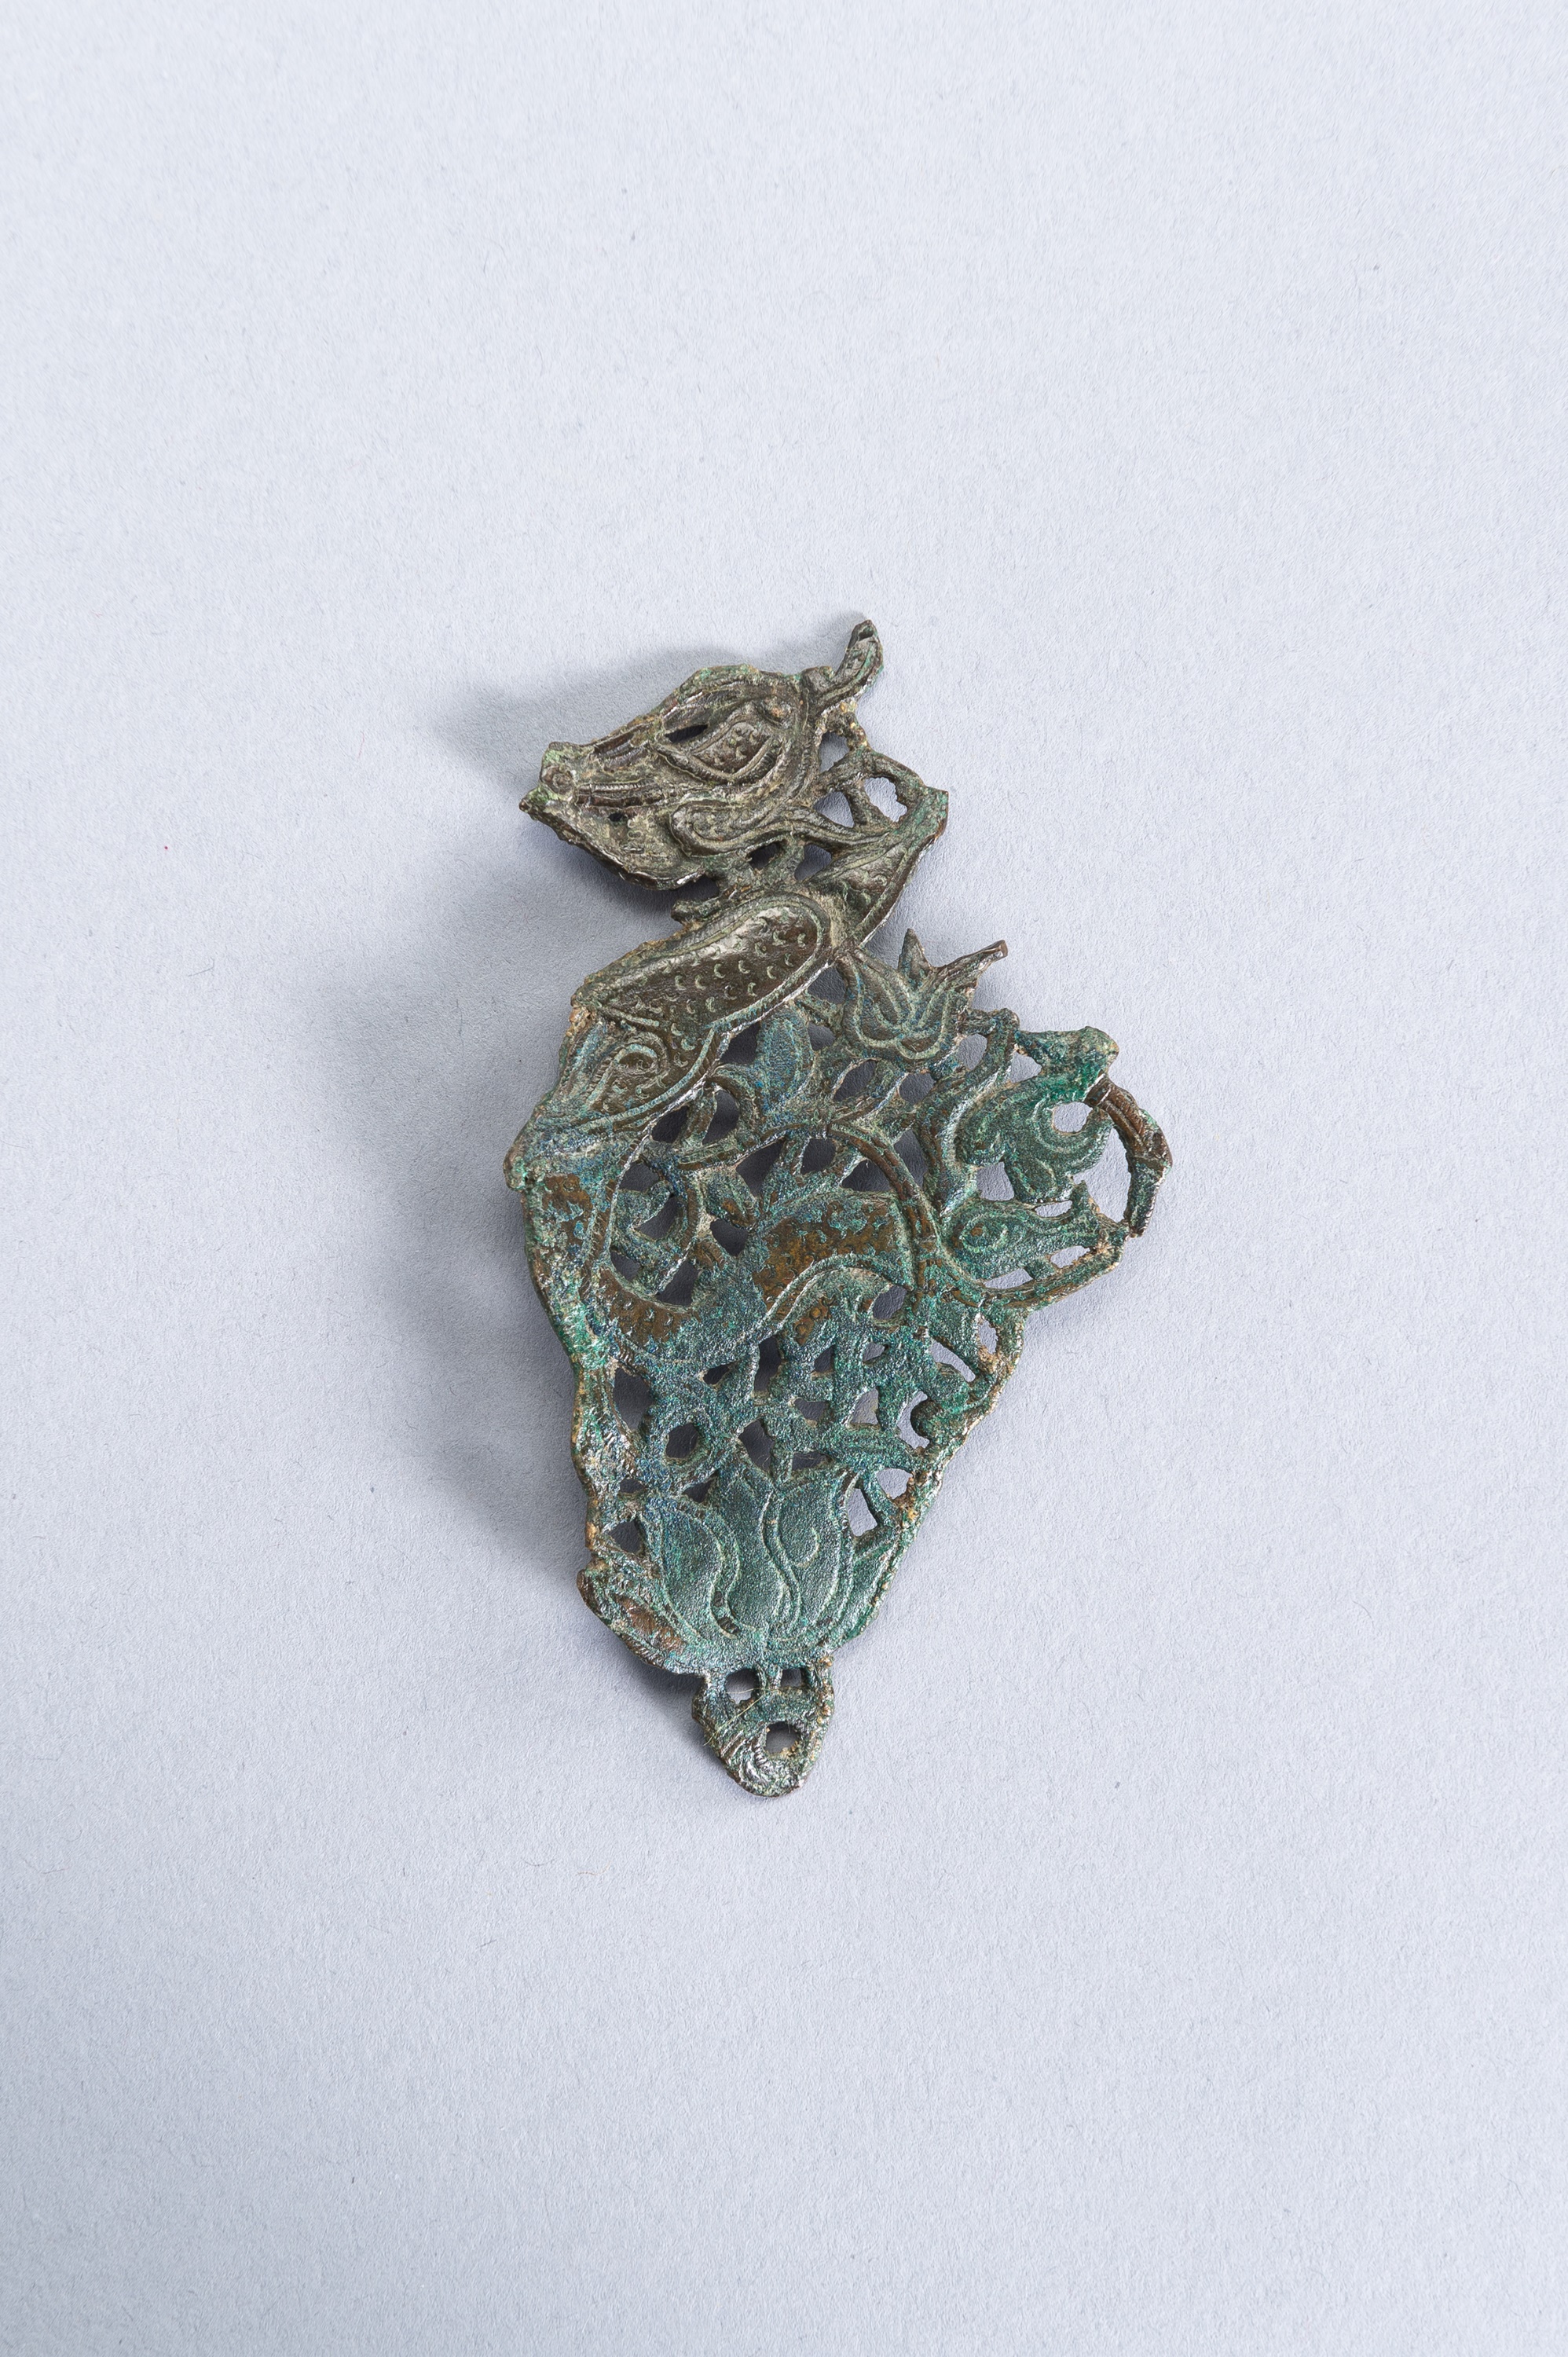 A CHINESE BRONZE ORNAMENT, TANG TO LIAO - Image 3 of 3